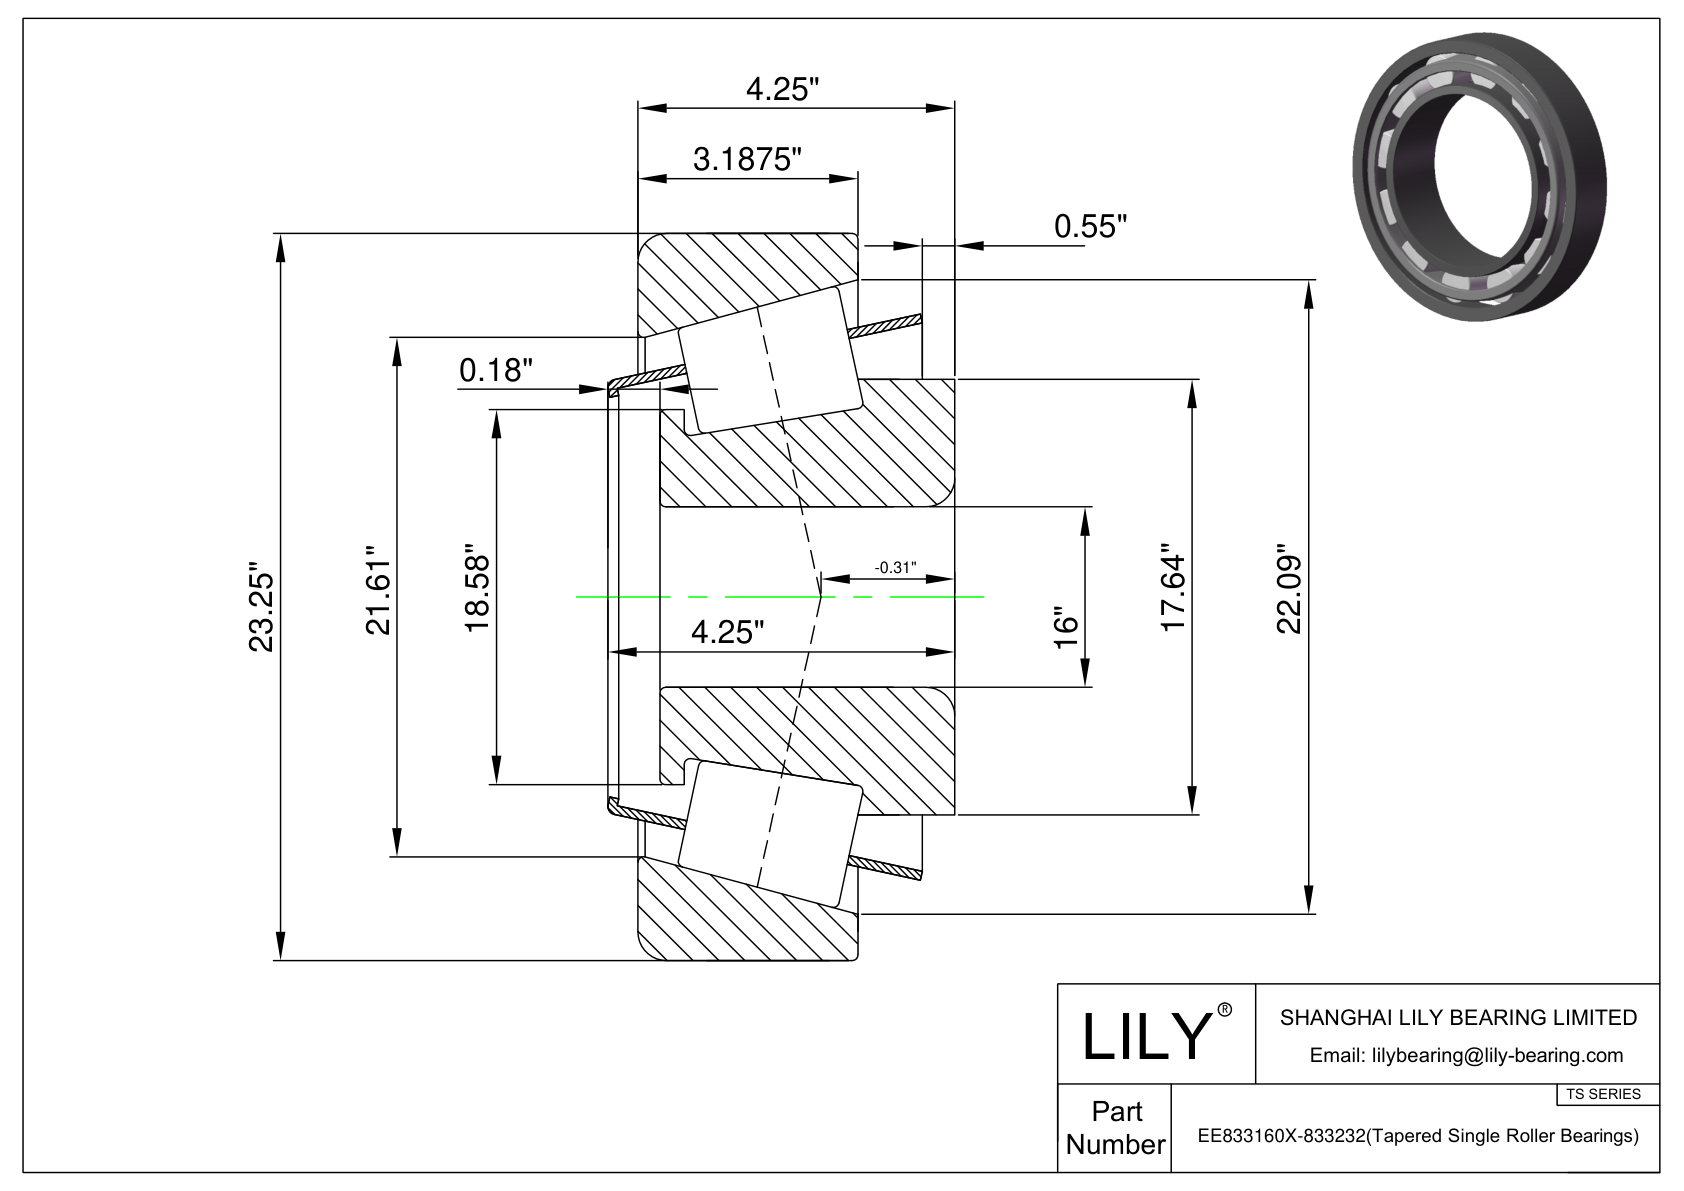 EE833160X-833232 TS (Tapered Single Roller Bearings) (Imperial) cad drawing